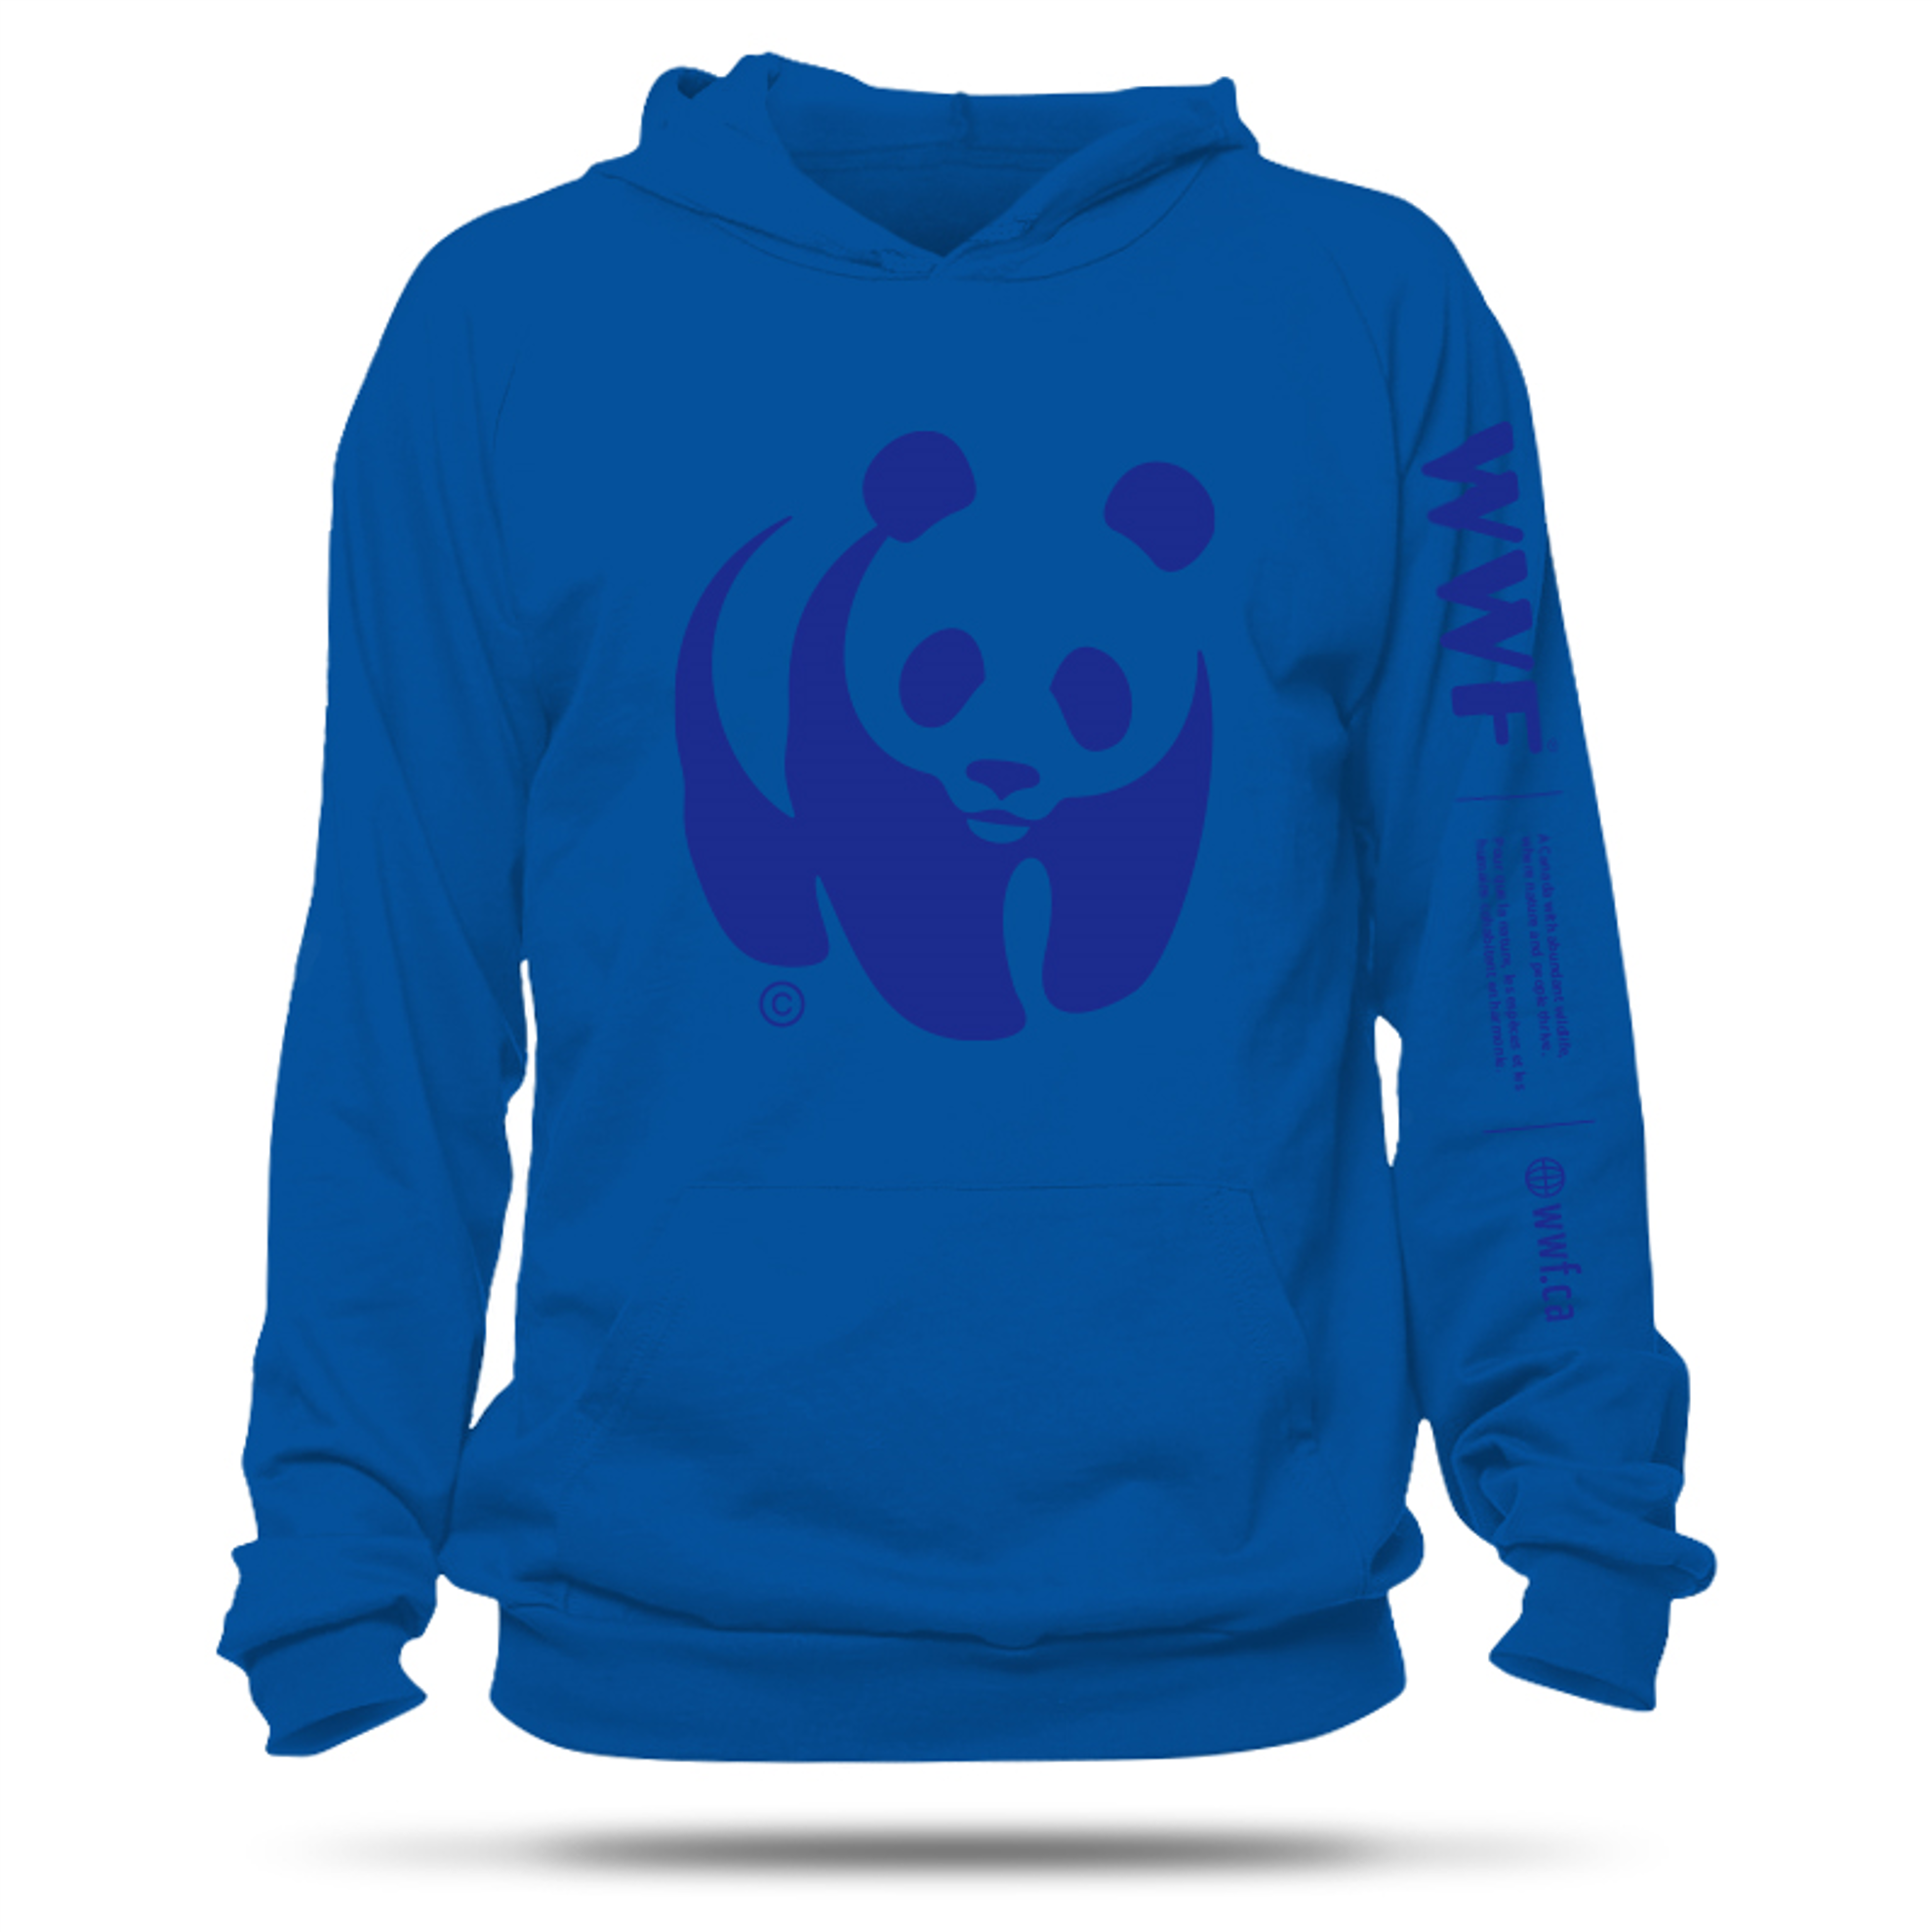 Unisex Nautical Blue Colour Hooded Sweatshirt with WWF Panda Logo on the Chest and WWF mission statement on the left sleeve